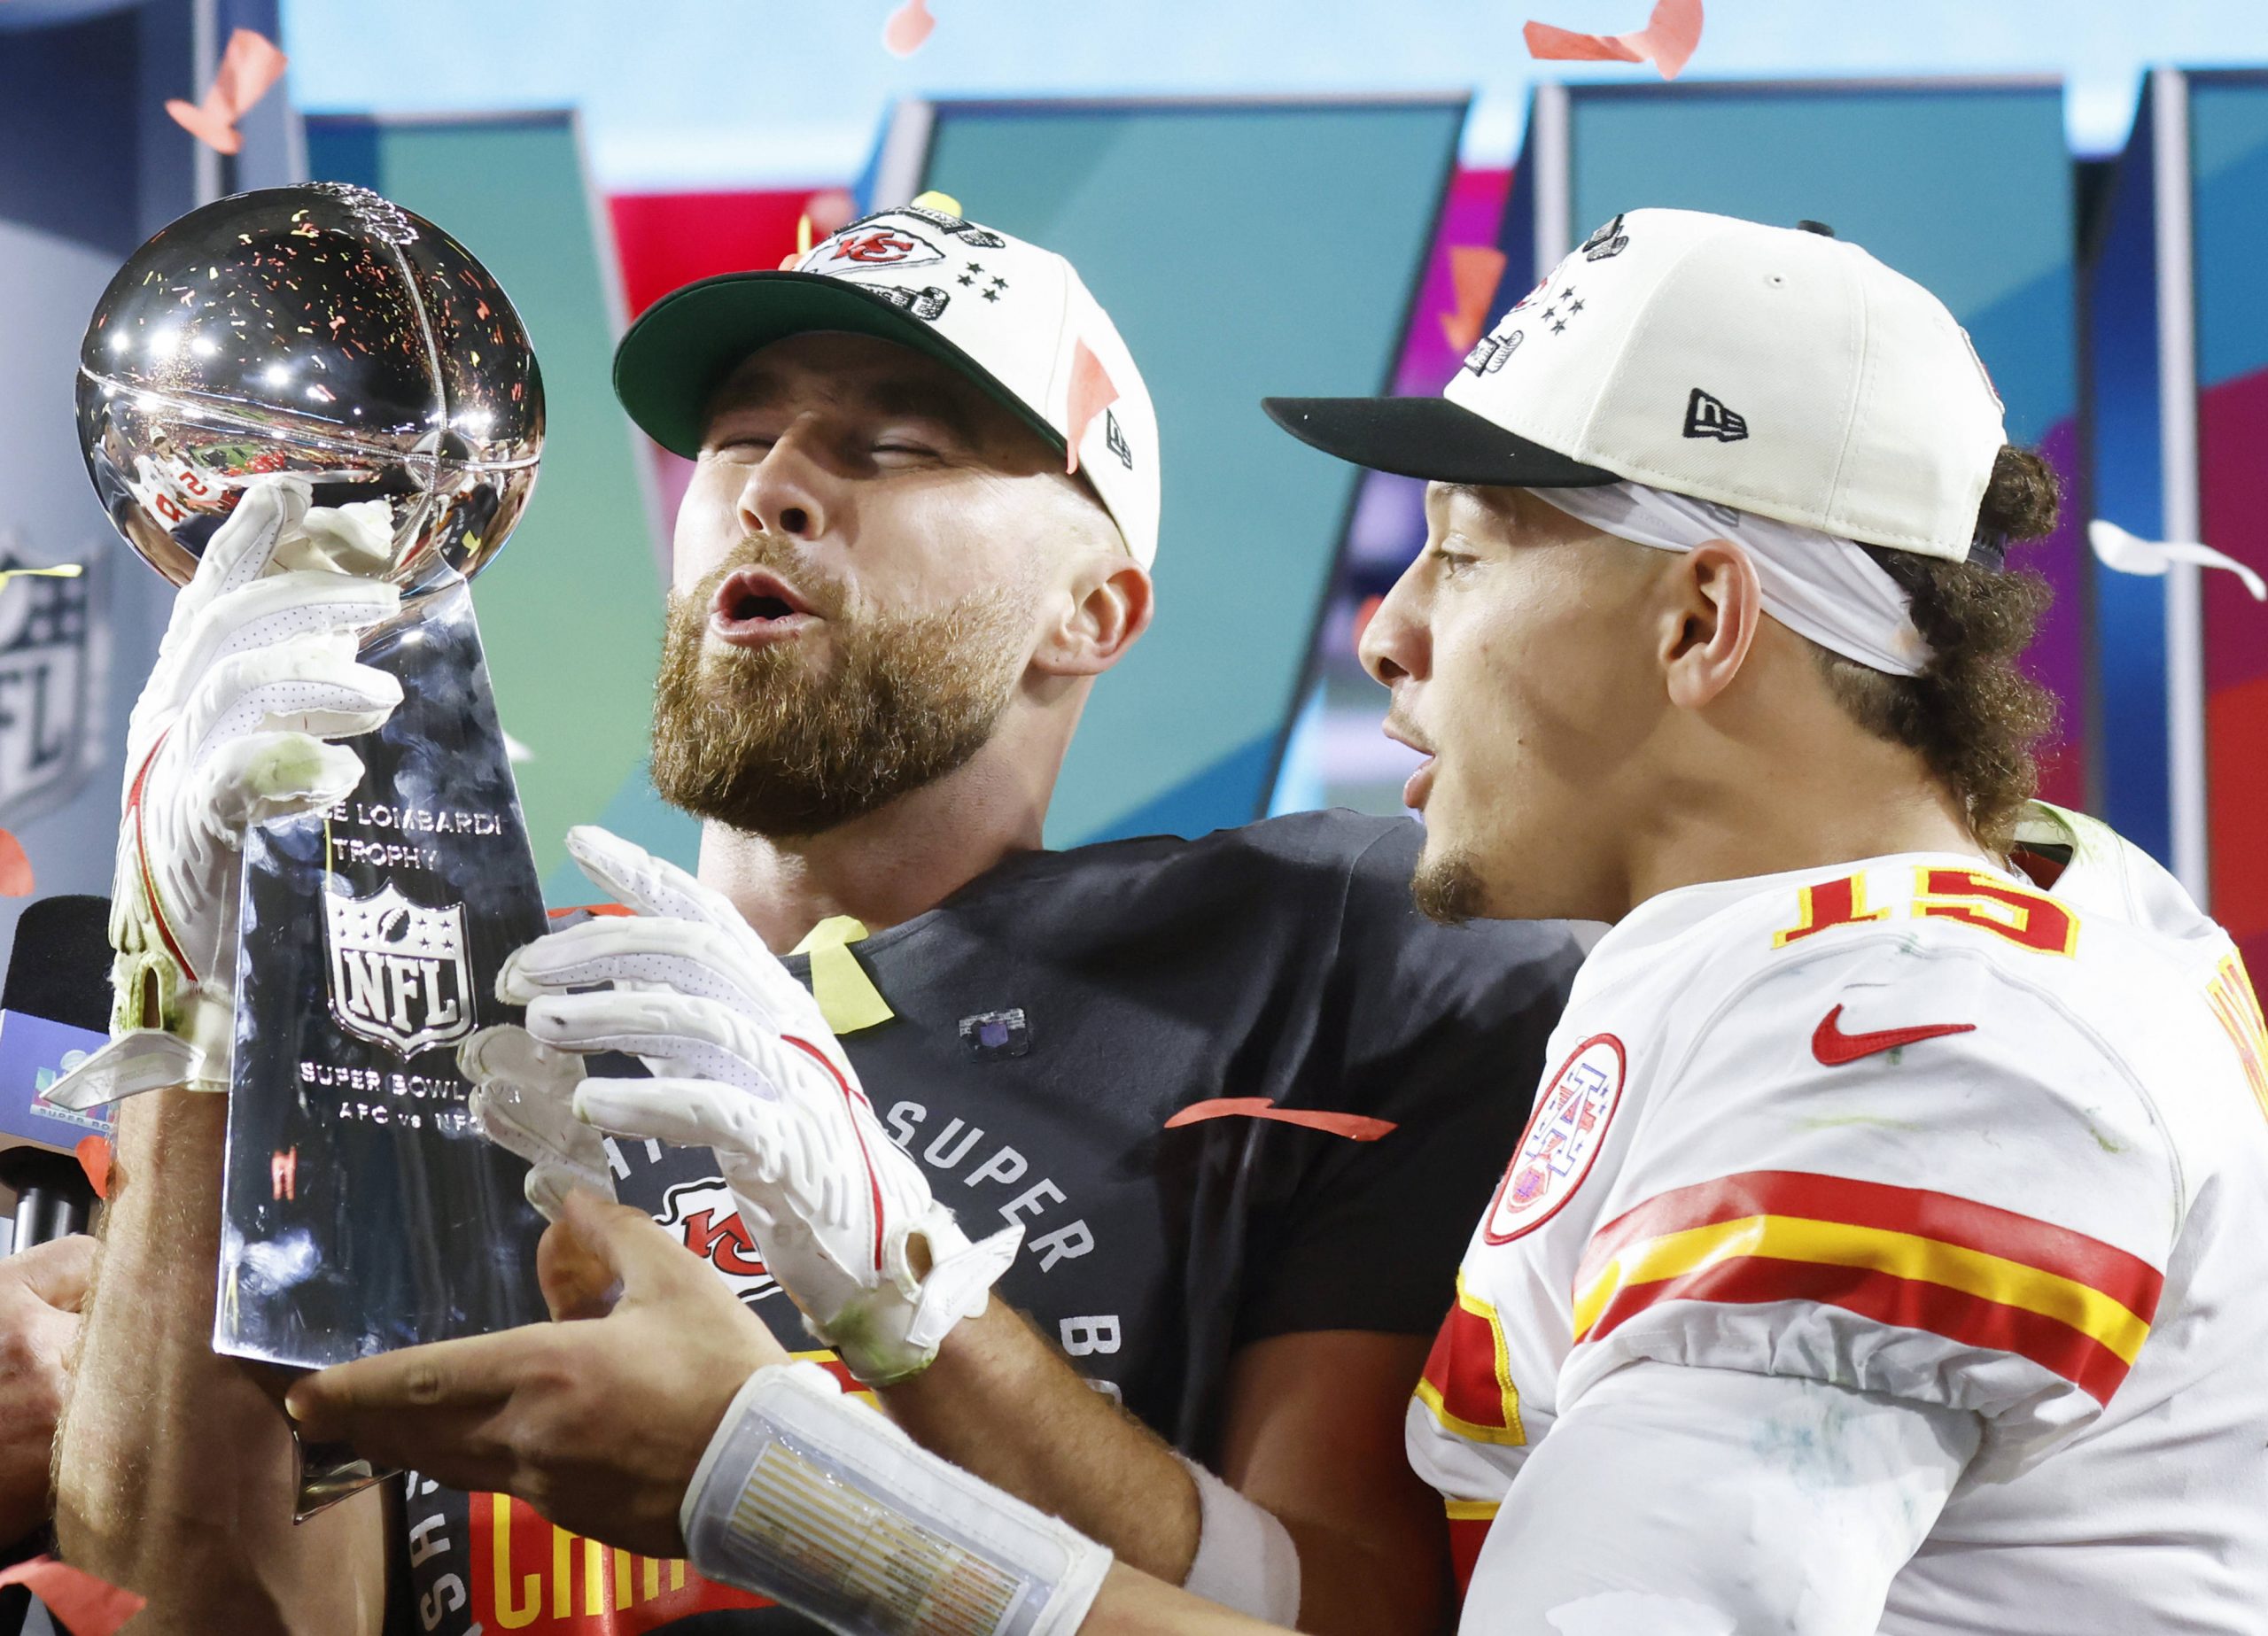 Kansas City Chiefs quarterback Patrick Mahomes 15 and tight end Travis Kelce celebrate with the the Lombardi Trophy after winning Super Bowl LVII 38-35 over the Philadelphia Eagles at State Farm Stadium in Glendale, Arizona, on Sunday, February 12, 2023. PUBLICATIONxINxGERxSUIxAUTxHUNxONLY SBP202302121054 JOHNxANGELILLO